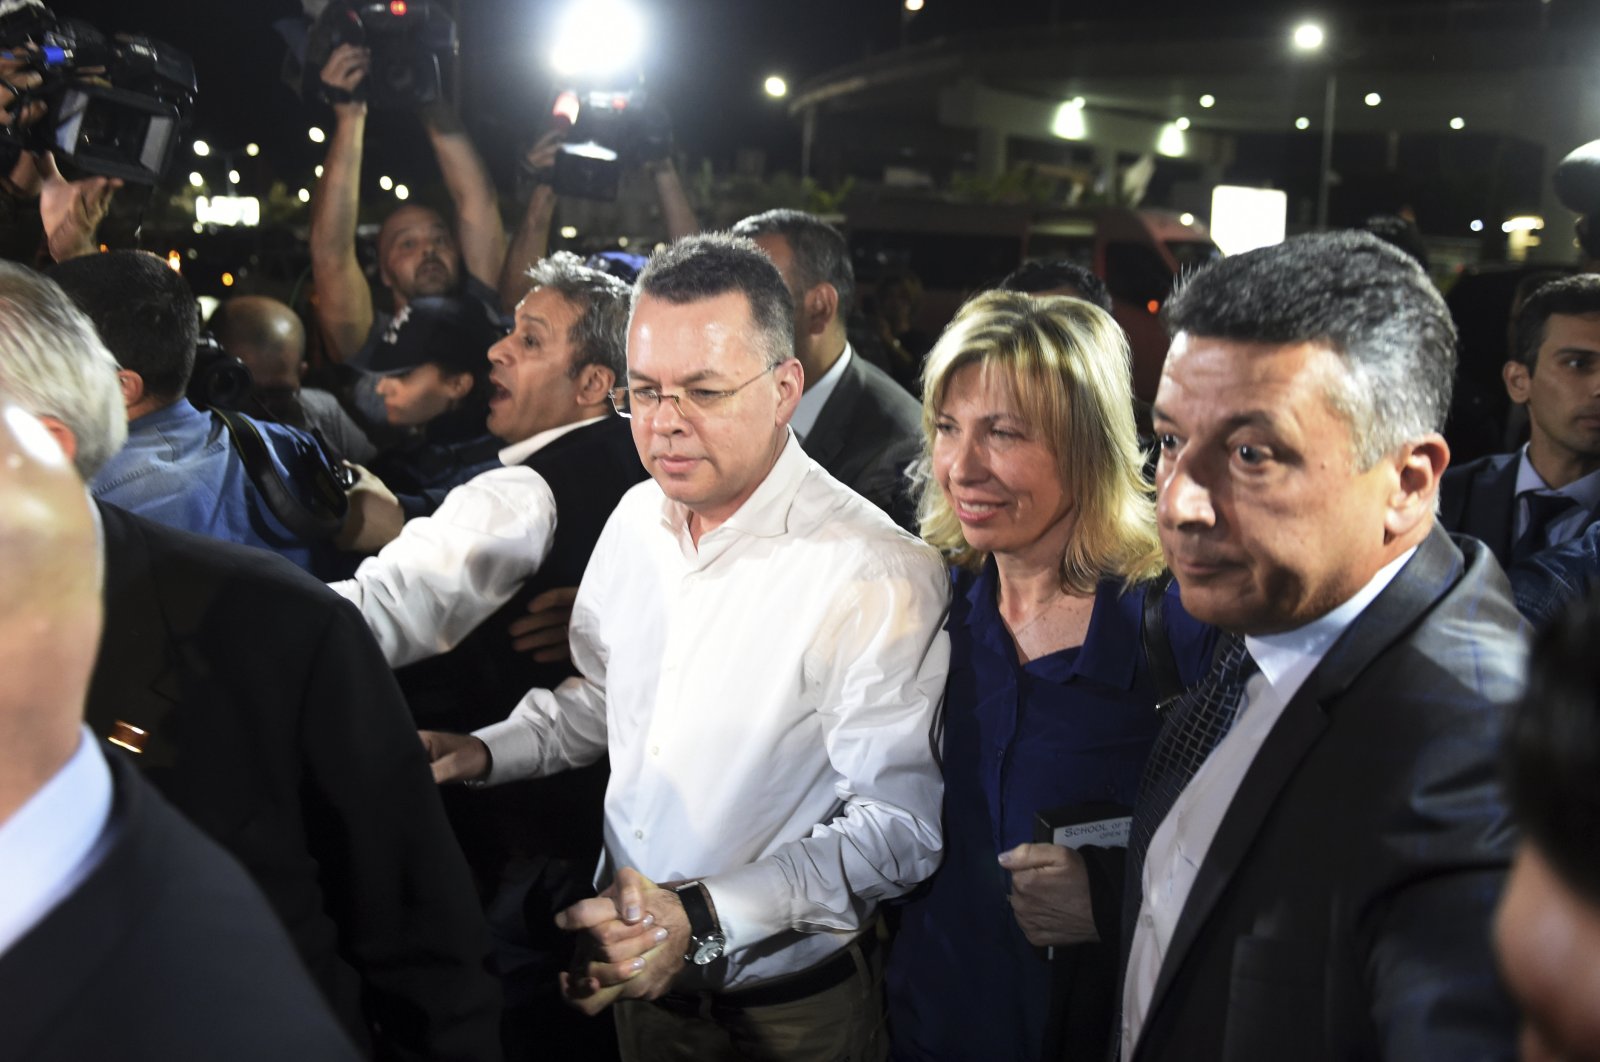 Andrew Brunson (C) arrives at the airport after his release, in Izmir, western Turkey, Oct. 12, 2018. (AP Photo)